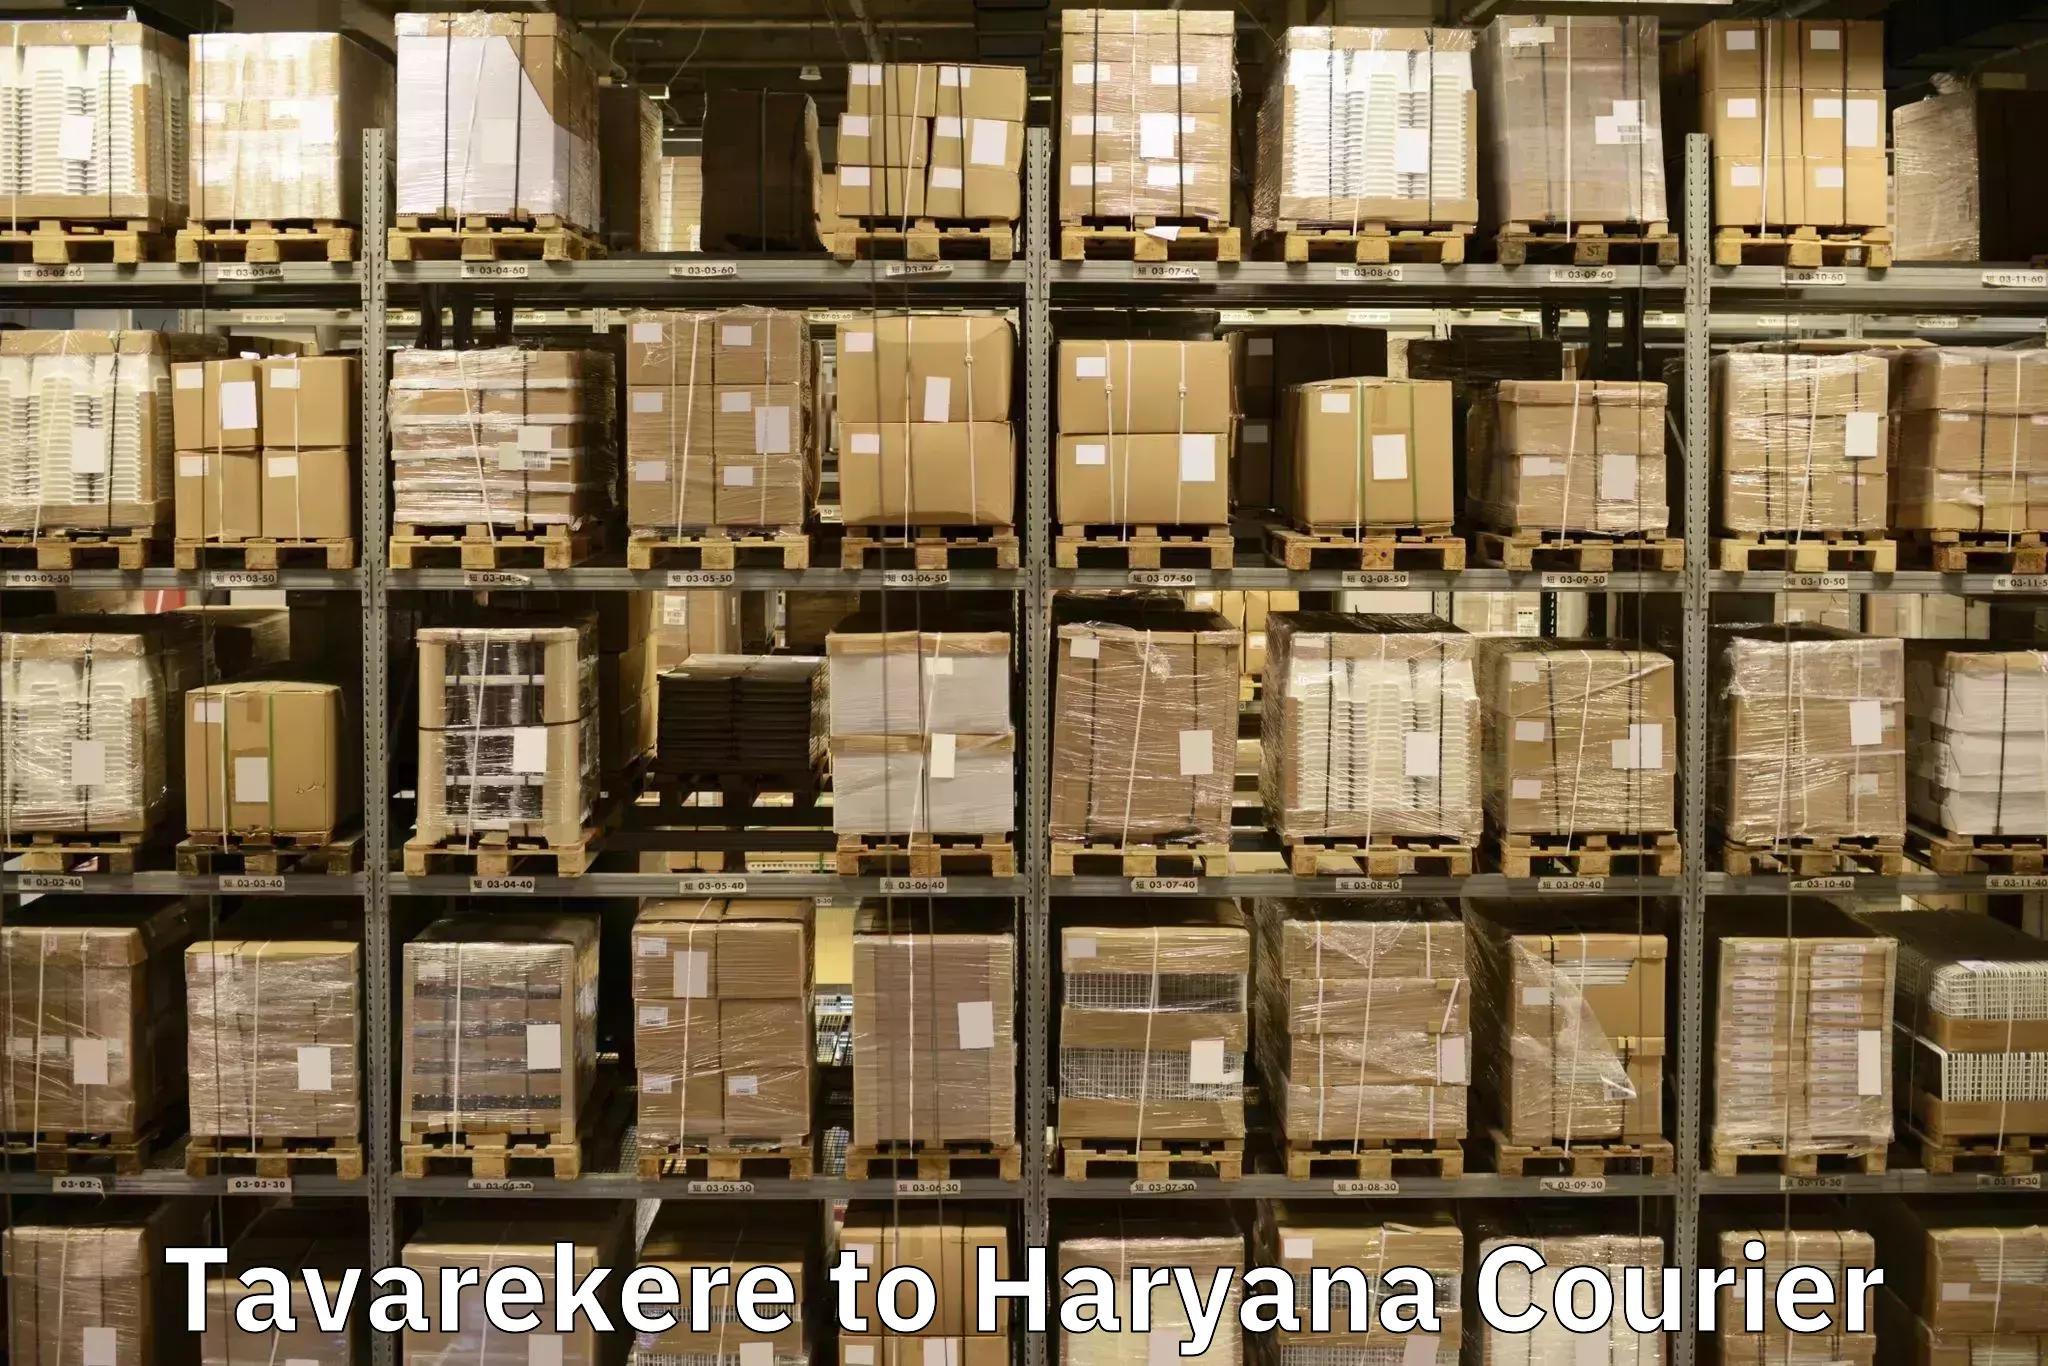 Moving and packing experts Tavarekere to NCR Haryana